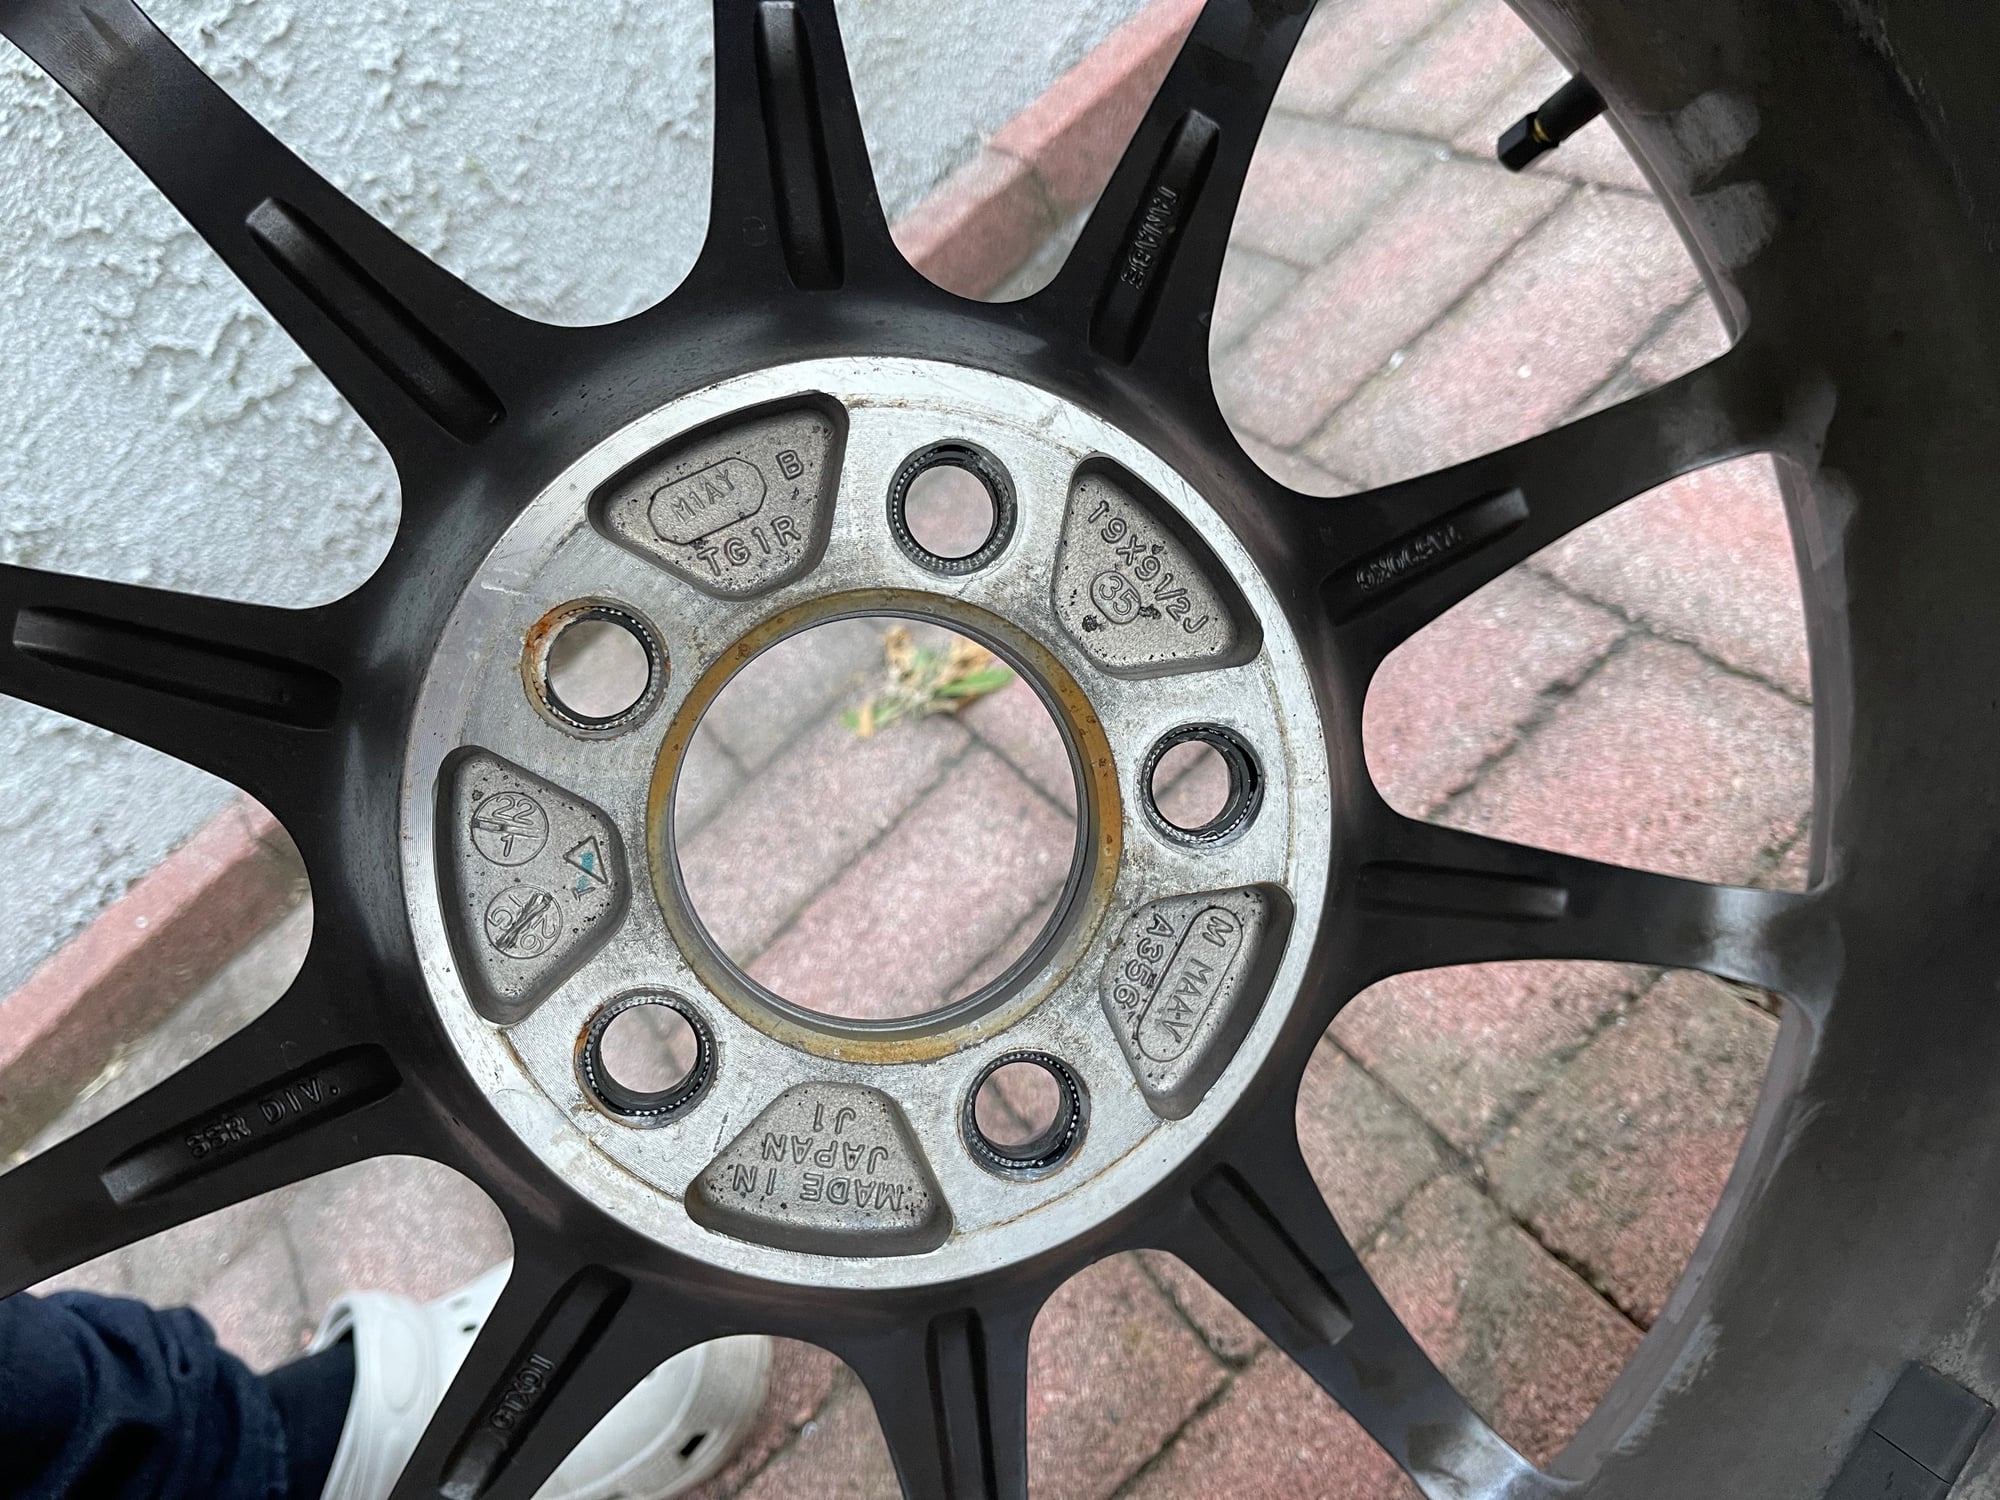 Wheels and Tires/Axles - Jaguar F Type parts (SSR, Yellow Speed) - Used - 2018 to 2022 Jaguar F-Type - Garden Grove, CA 92844, United States